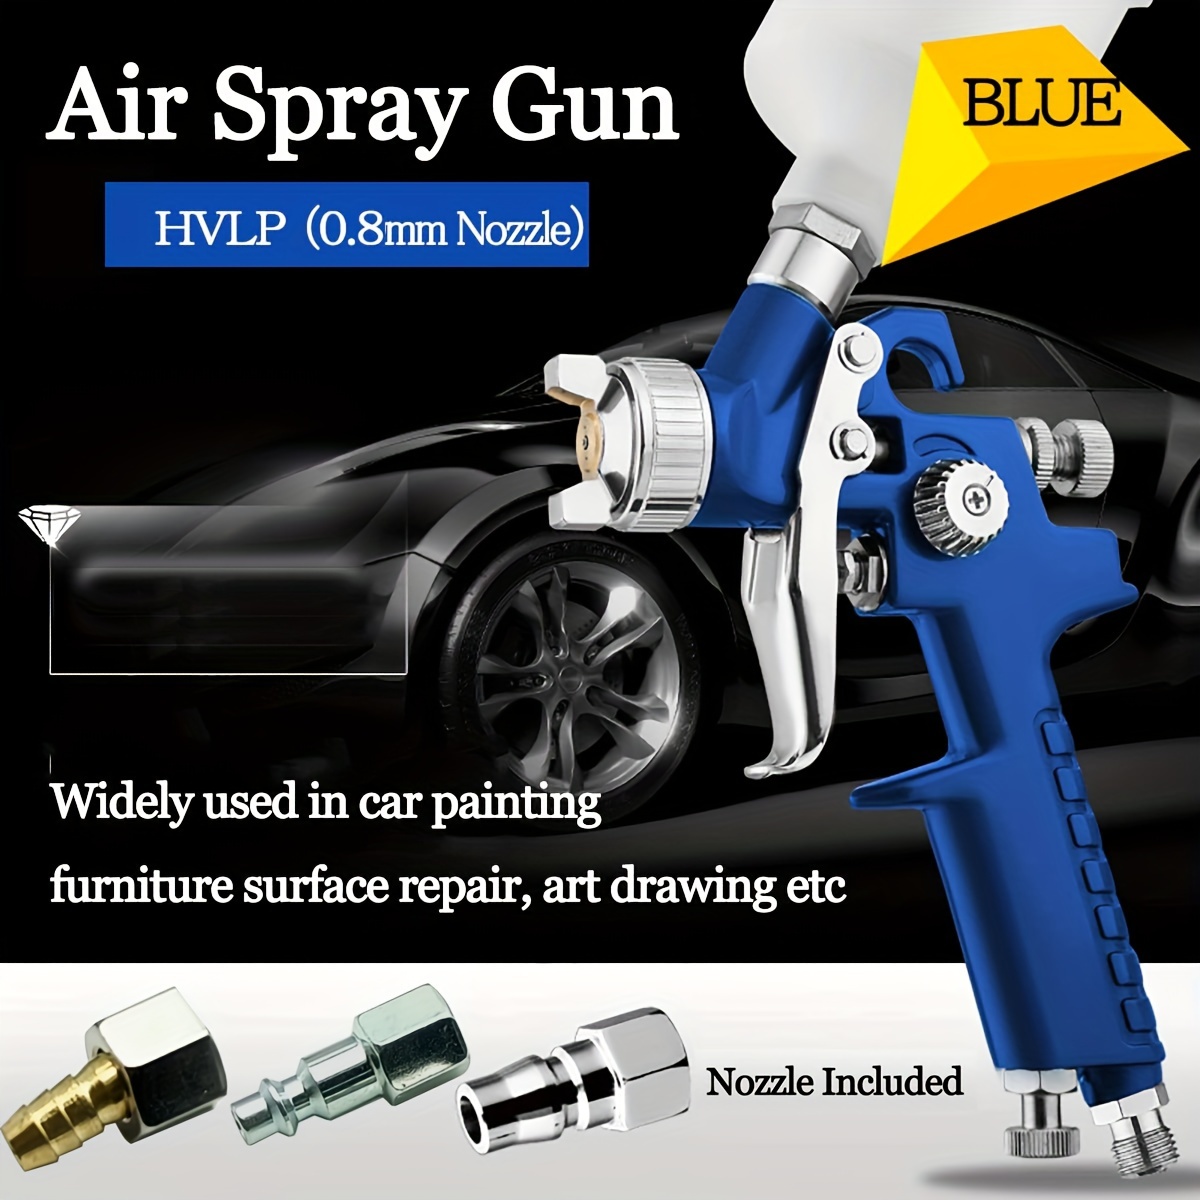 HVLP Spray Gun Air Paint Sprayer,Gravity Feed Touch Up Paint Gun with 1.4mm  Nozzle & 17pcs Spray Gun Cleaning Kit for Automotive,House Painting and